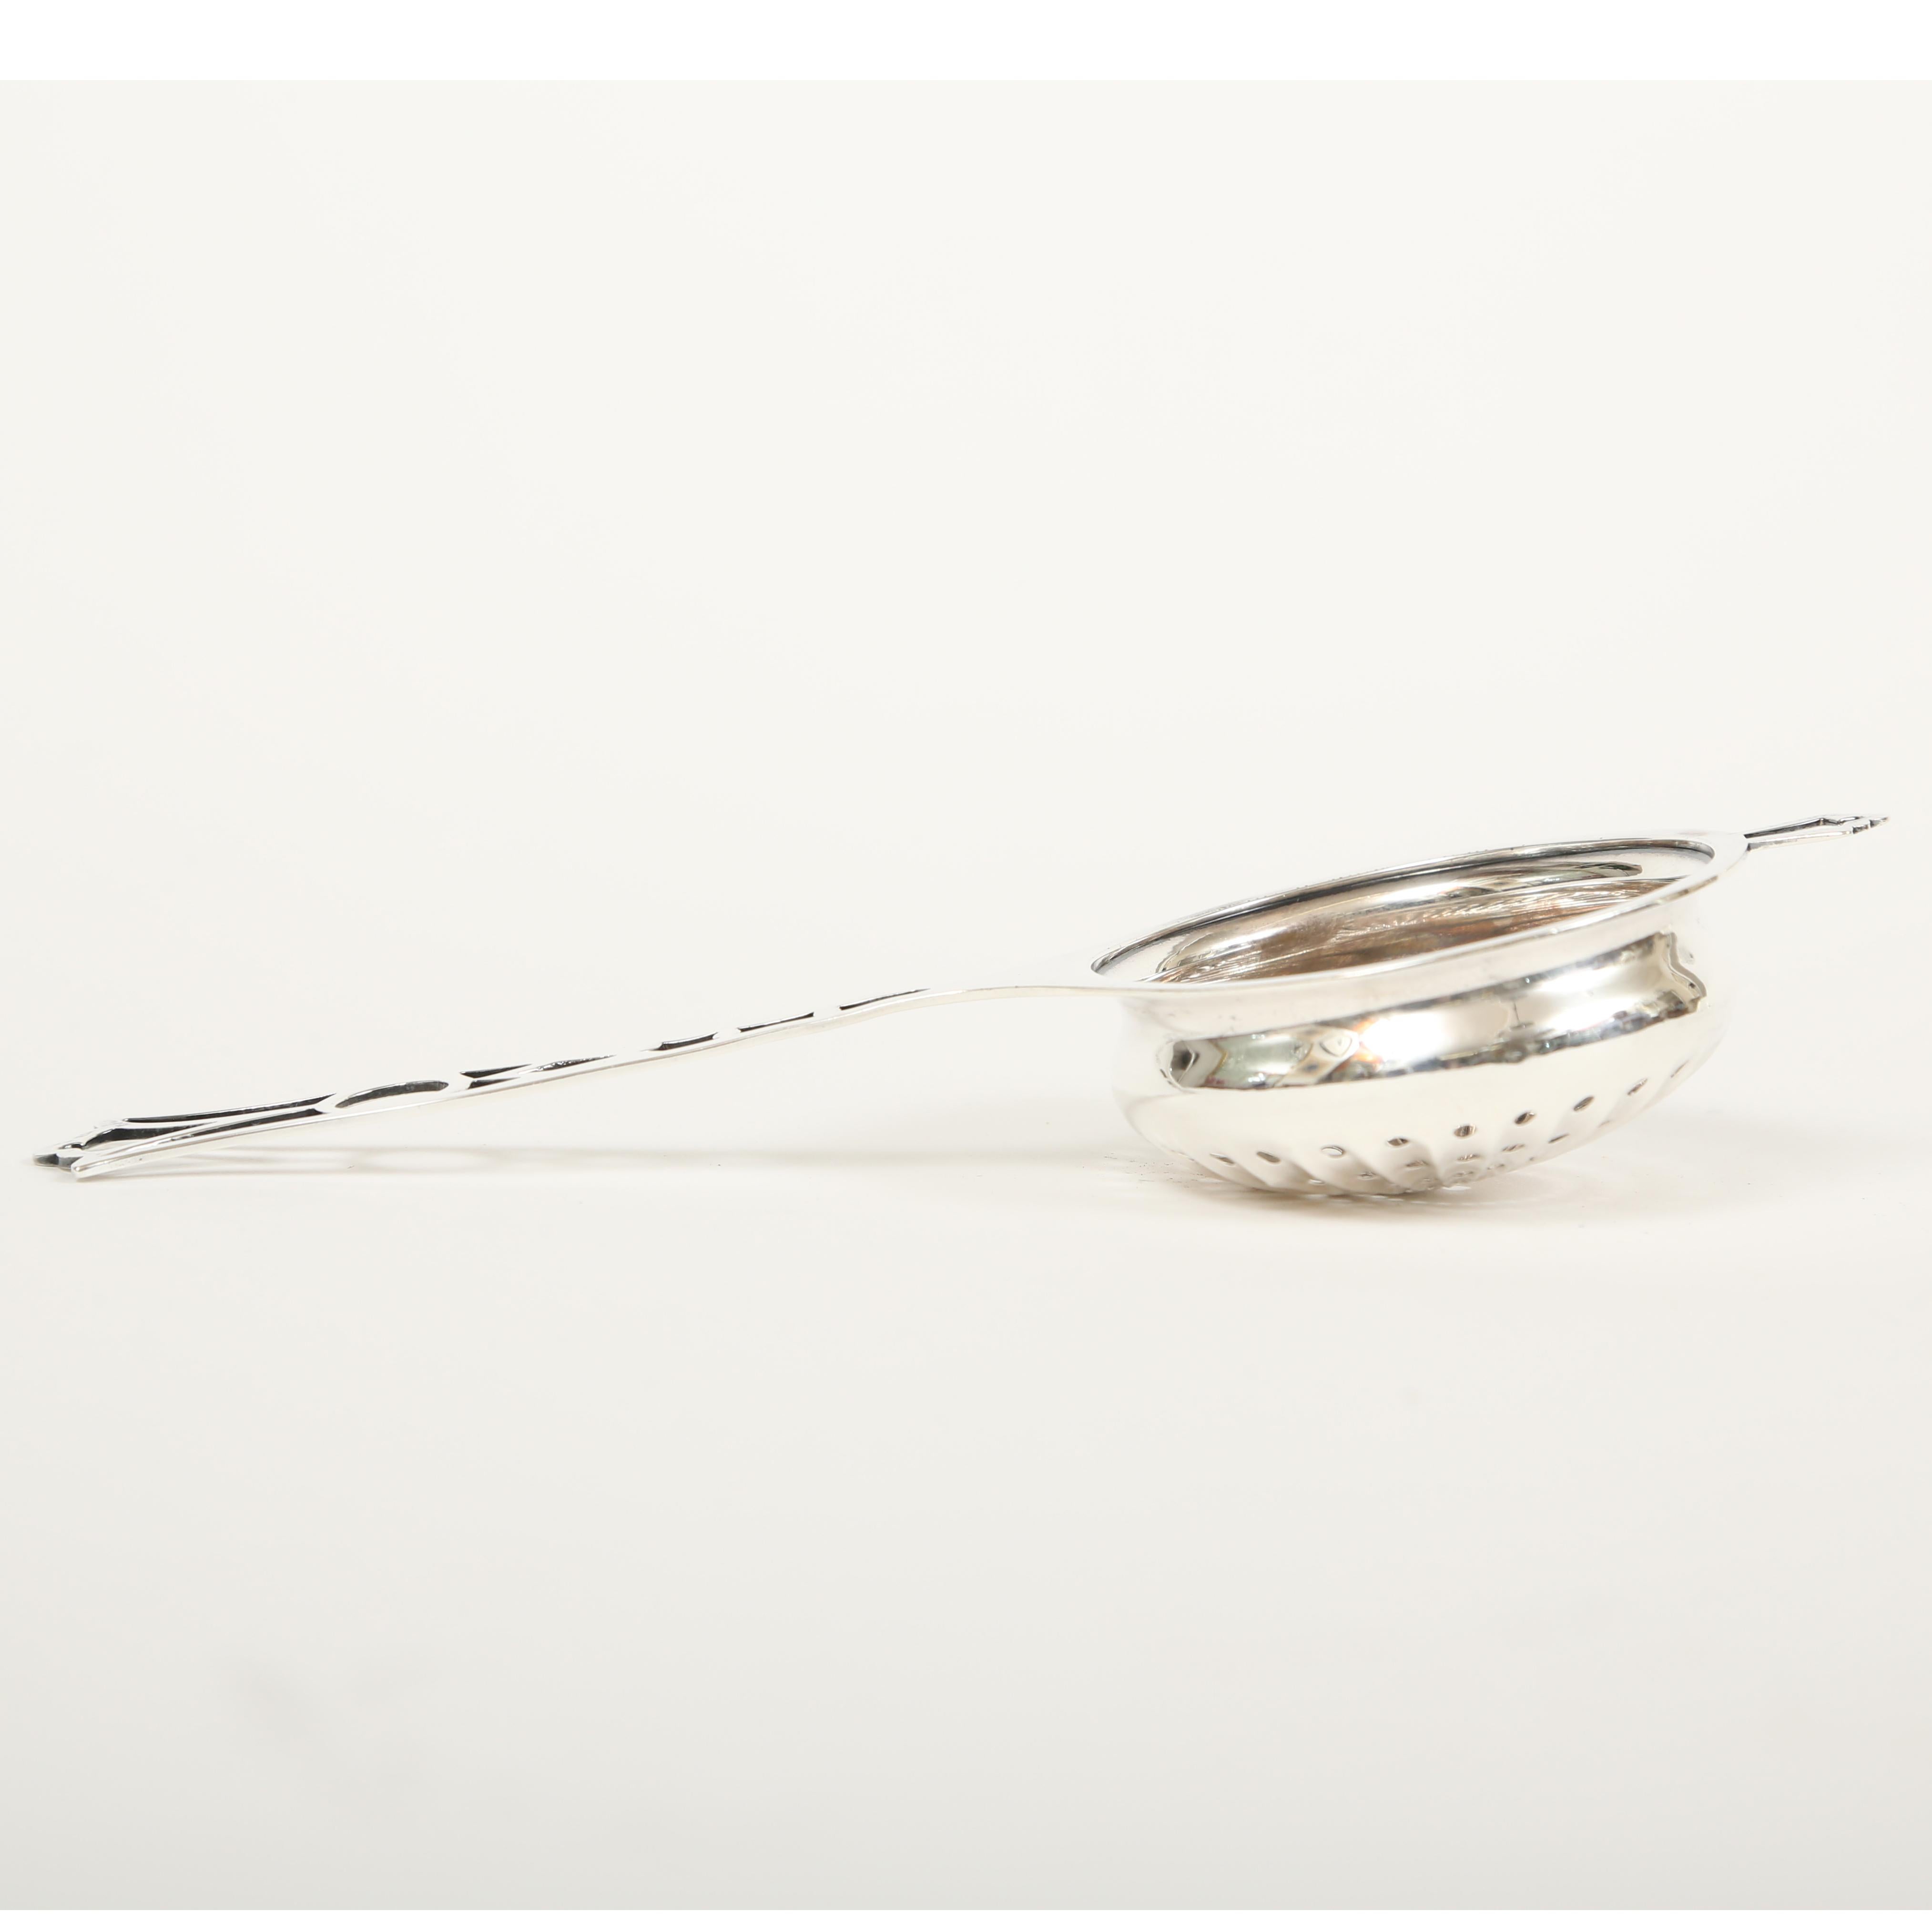 Hand-Crafted Sterling Silver Tea Strainer by Webster & Co.